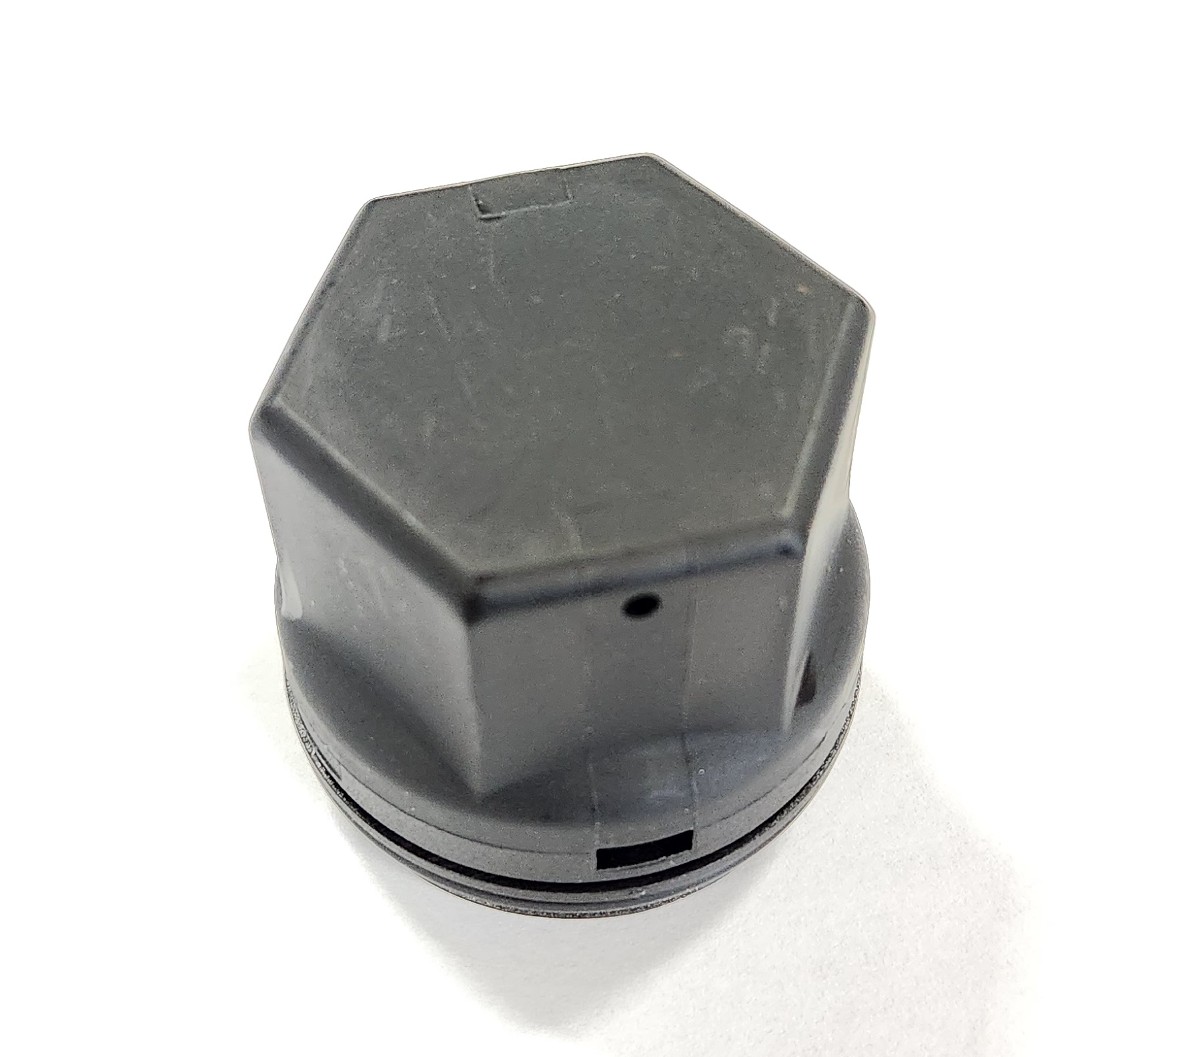 Replacement Master Cylinder Cap for Titan Models 10 and 20 Actuators